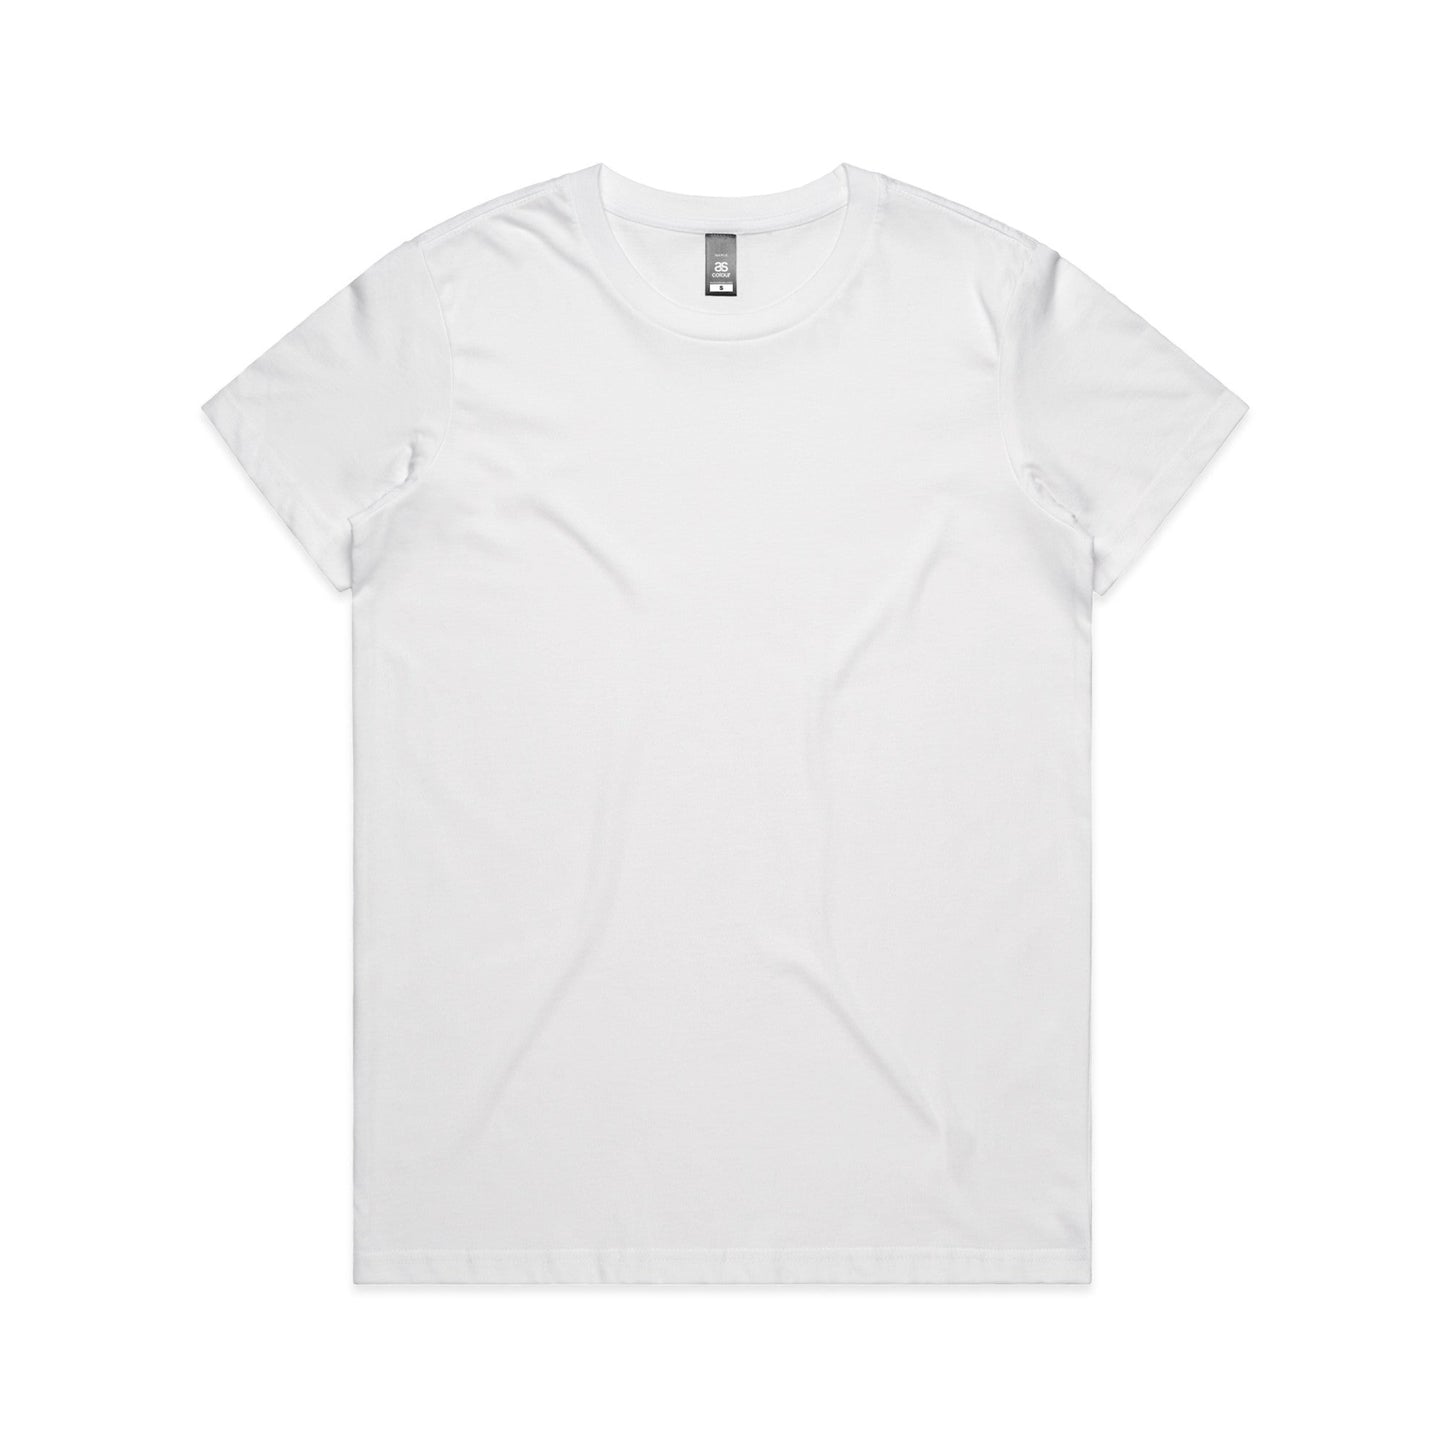 "Not Just Clean Monica Clean" Relaxed Maple T-Shirt